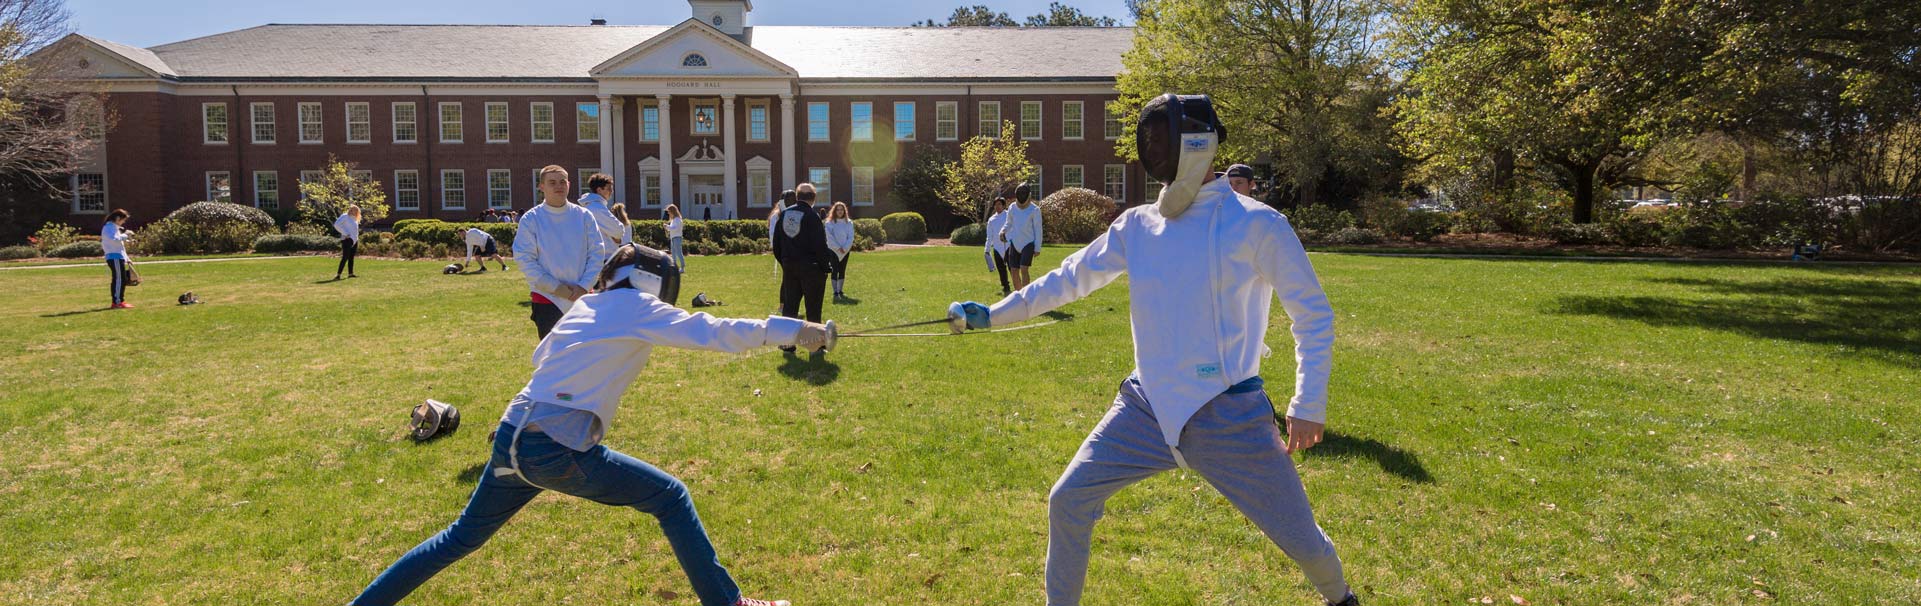 2 People fencing outdoors at UNCW